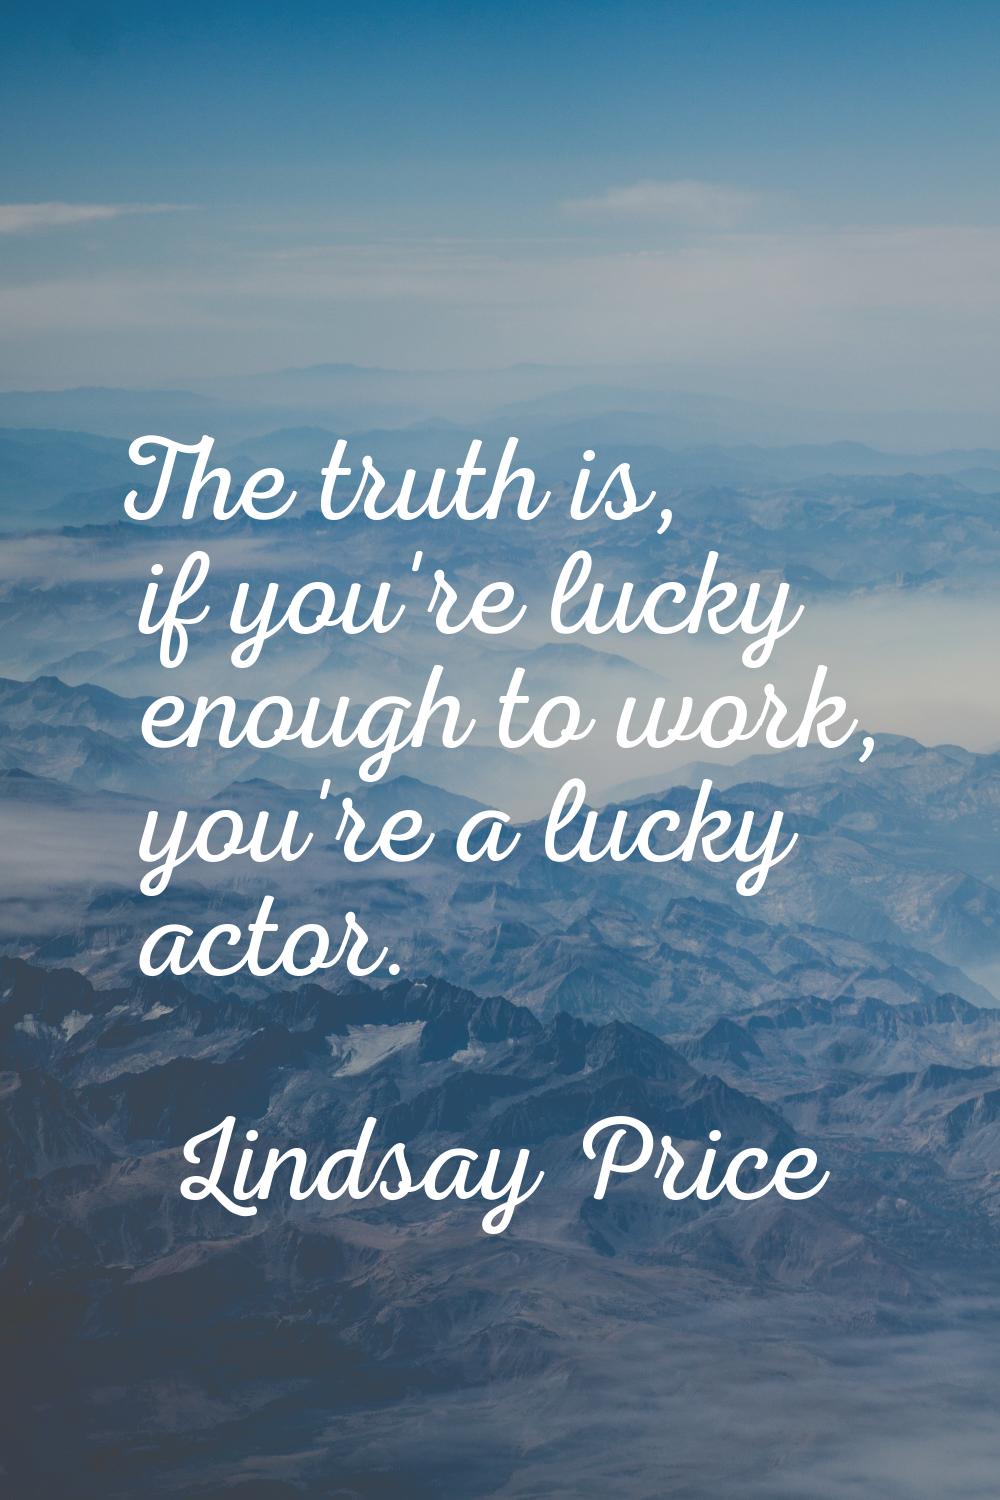 The truth is, if you're lucky enough to work, you're a lucky actor.